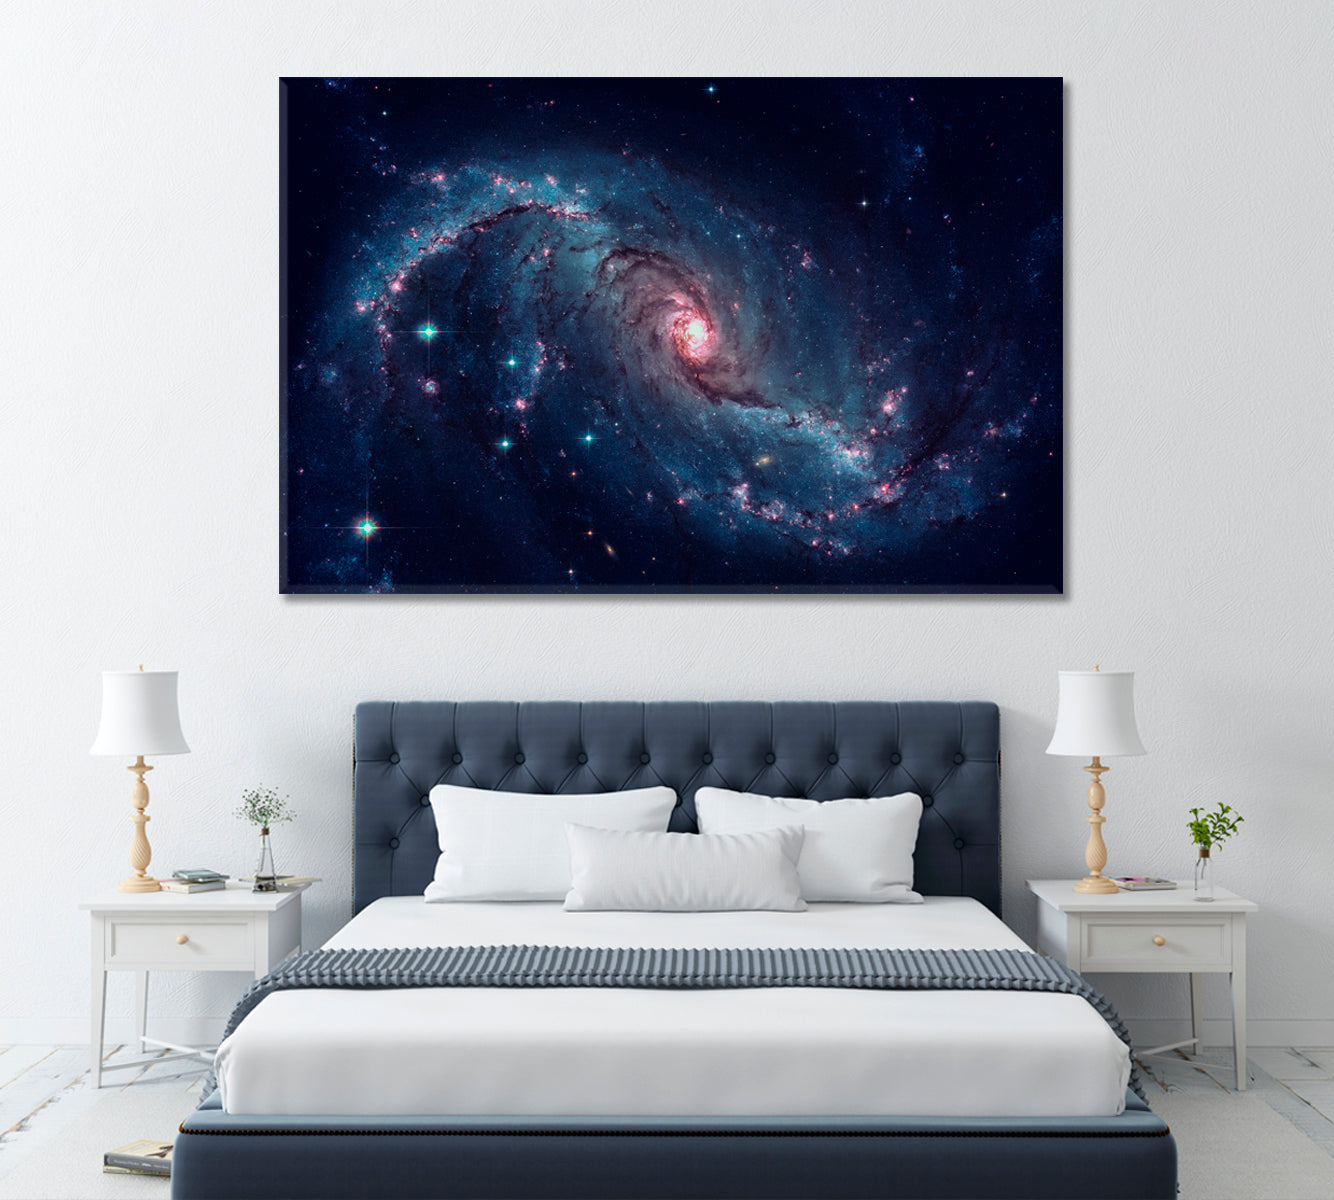 Stellar Nursery in the Arms of NGC 1672 Canvas Print ArtLexy 1 Panel 24"x16" inches 